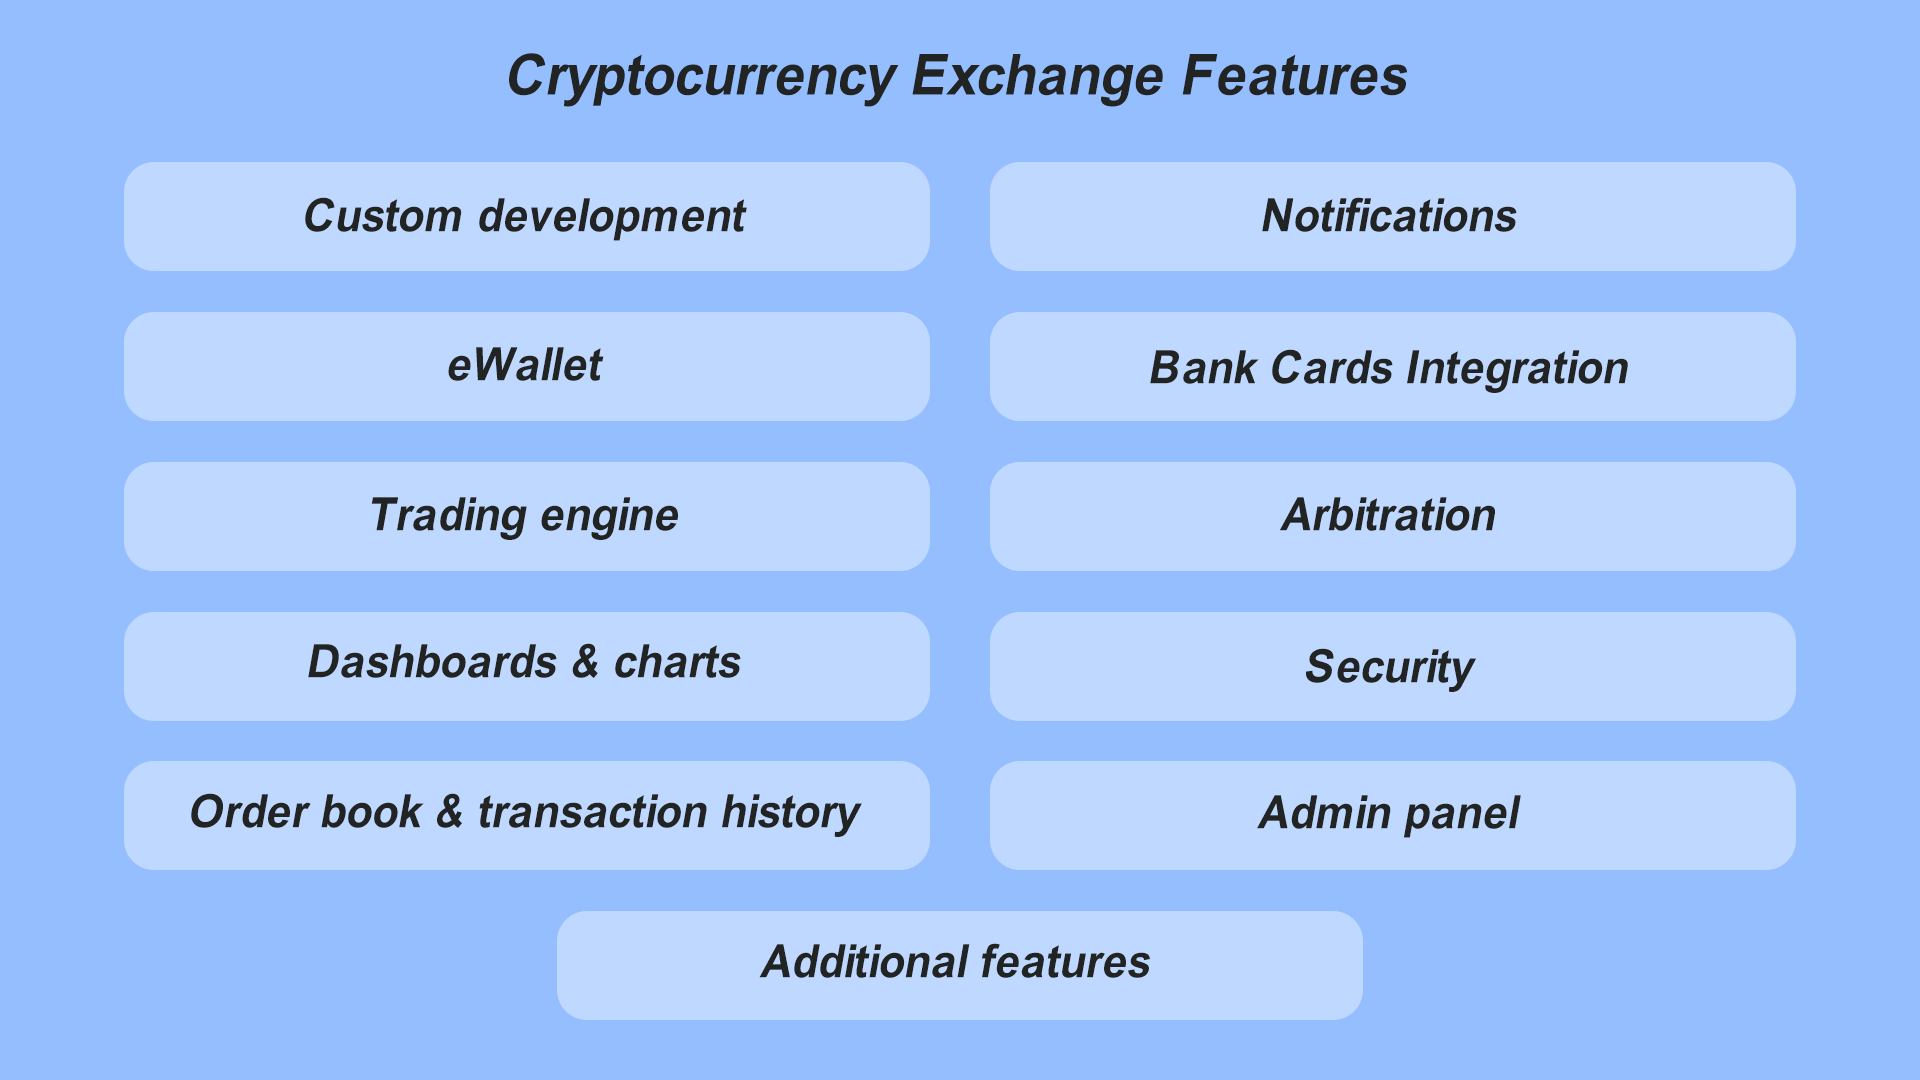 Cryptocurrency exchange features